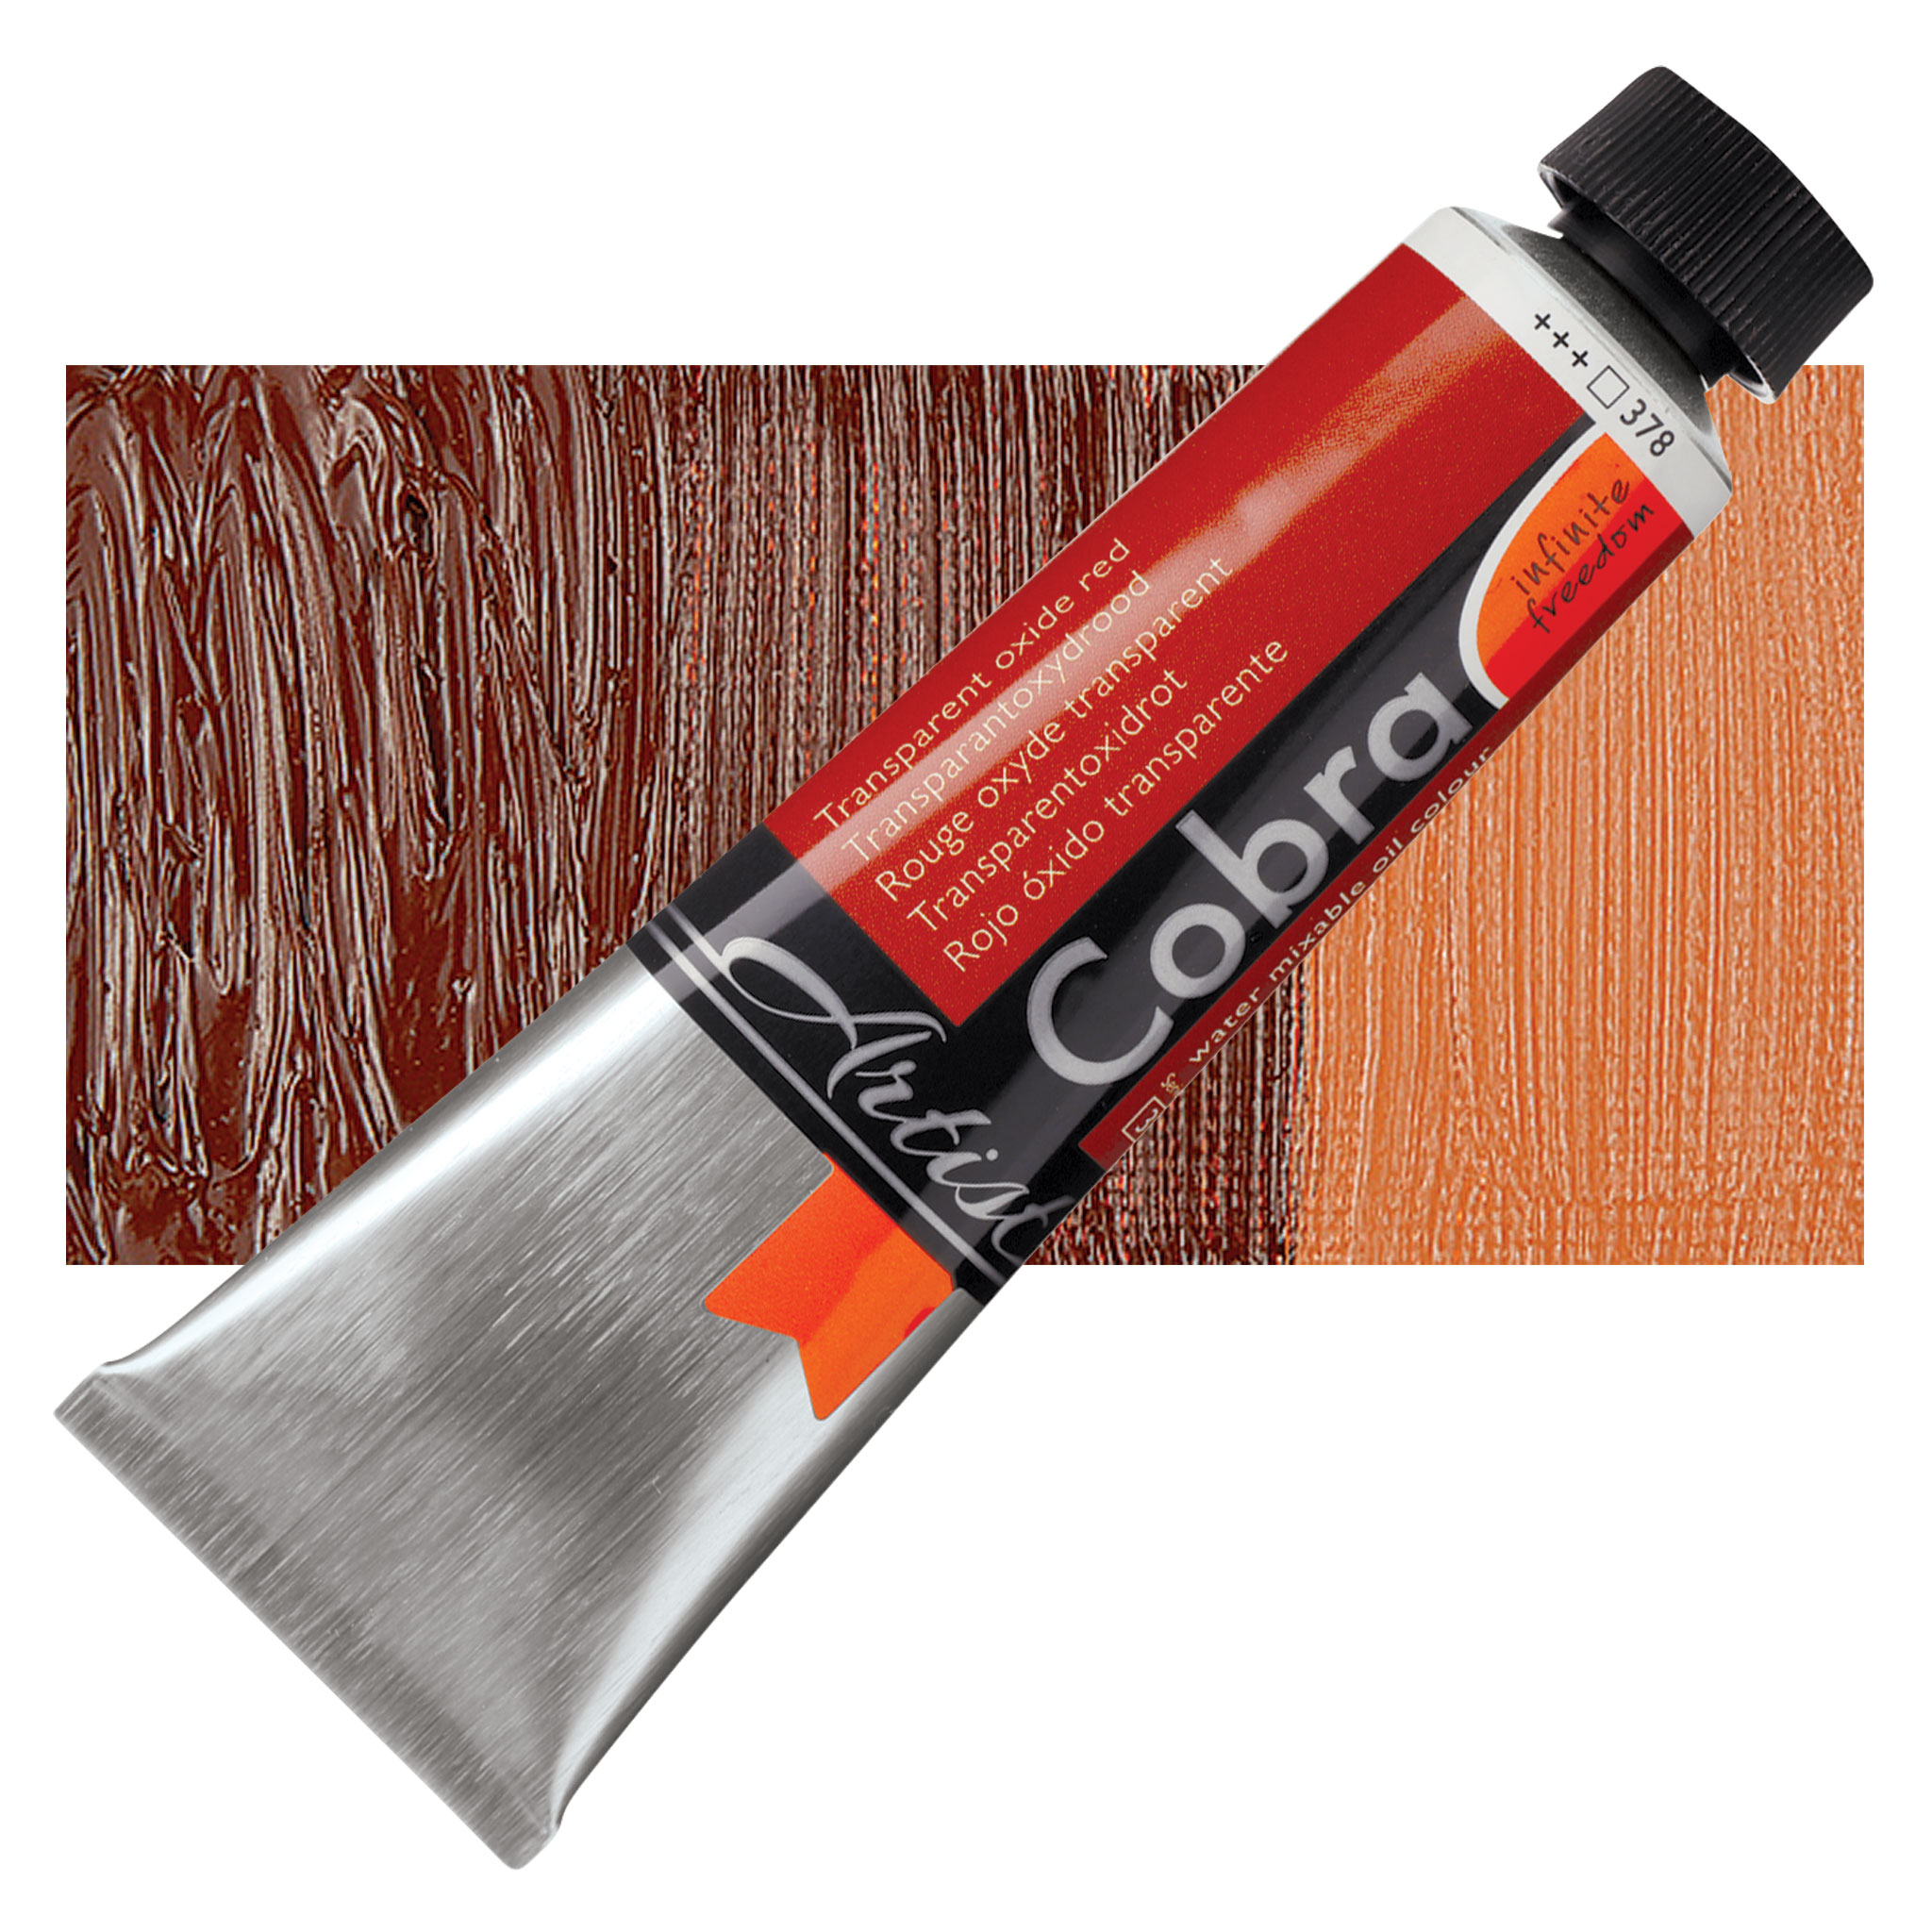 Cobra Water Mixable Oil Color 40ml Primary Cyan